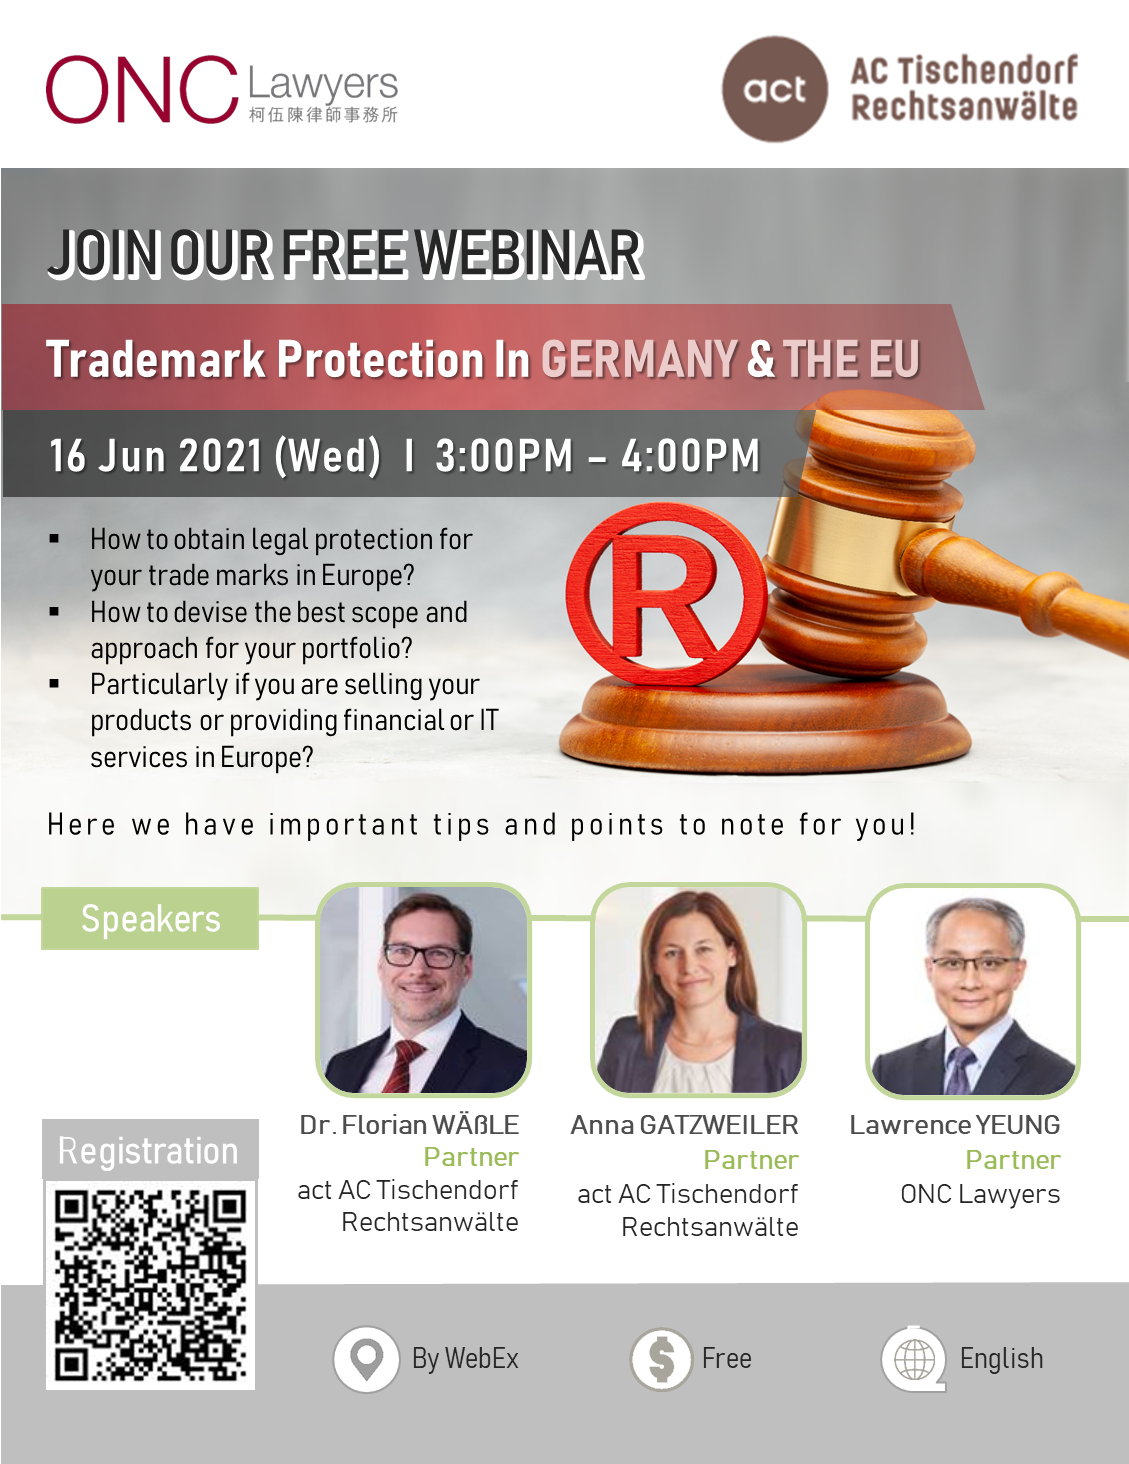 “Trademark Protection in Germany and the EU” Webinar